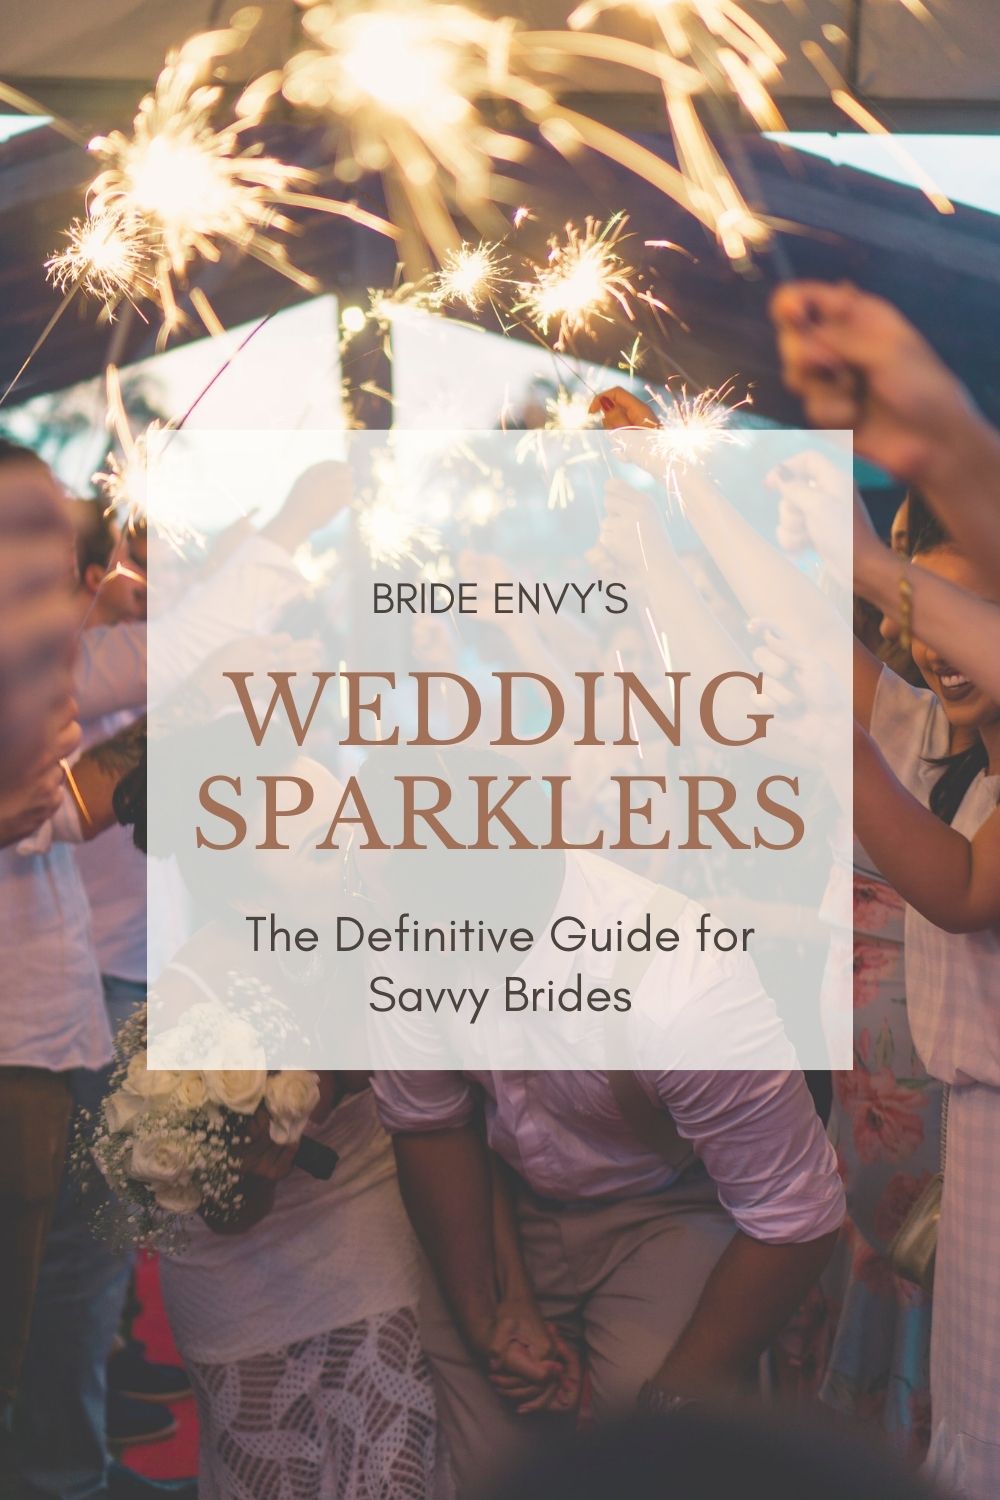 Wedding Sparklers - The Definitive Guide - Pinterest Pin